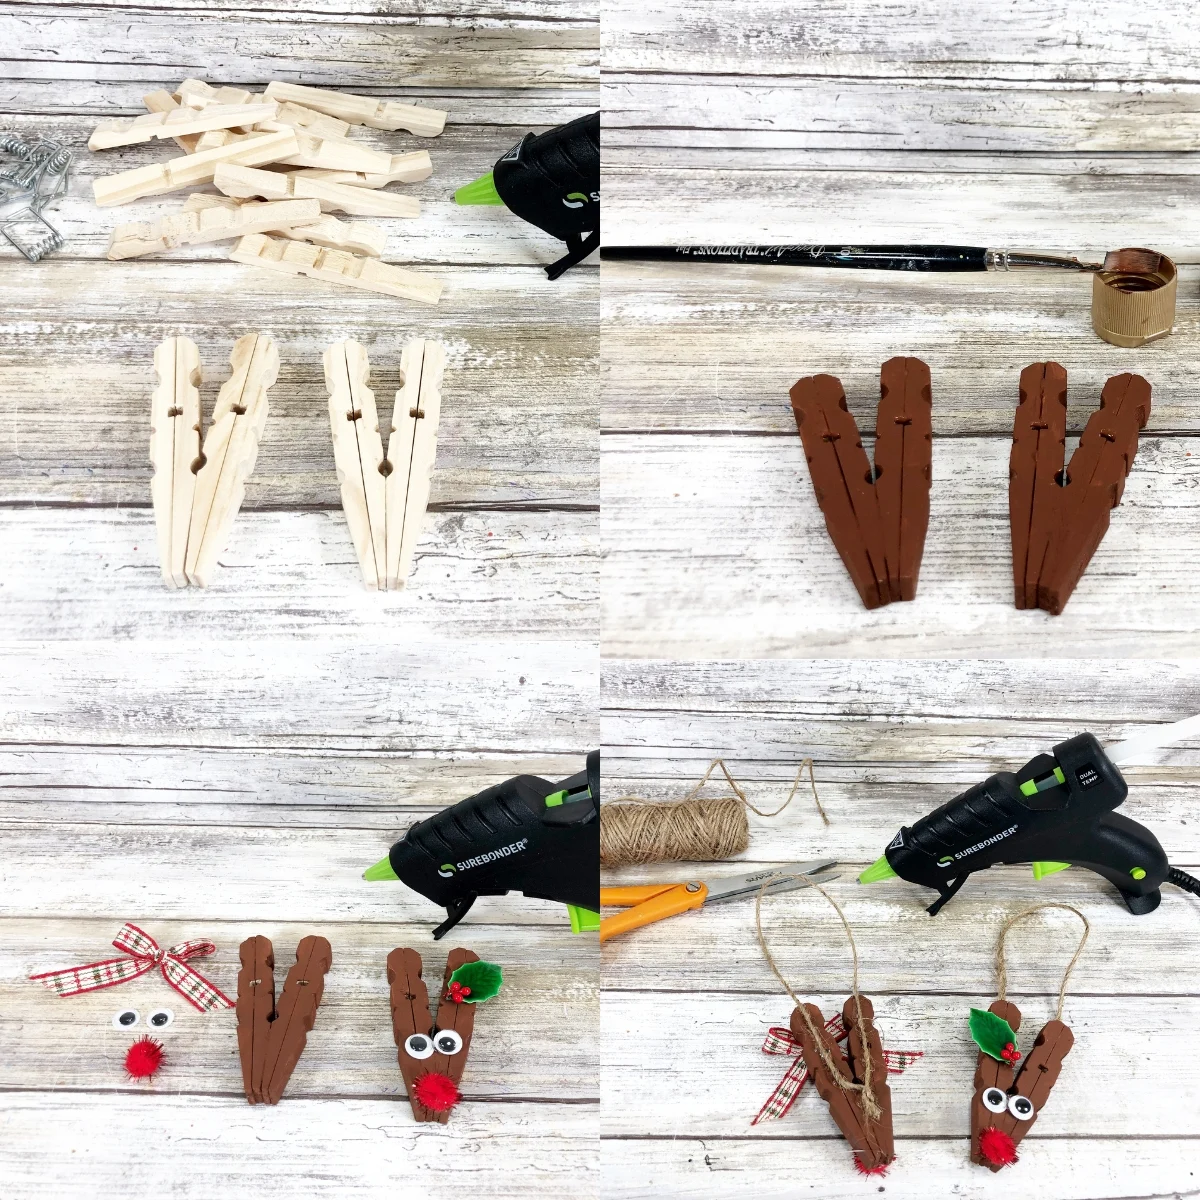 Image collage showing four main steps to making reindeer with clothespins. How to take clothespins apart and arrange them. Painting them brown. Gluing on eyes and nose. And adding twine to the back.